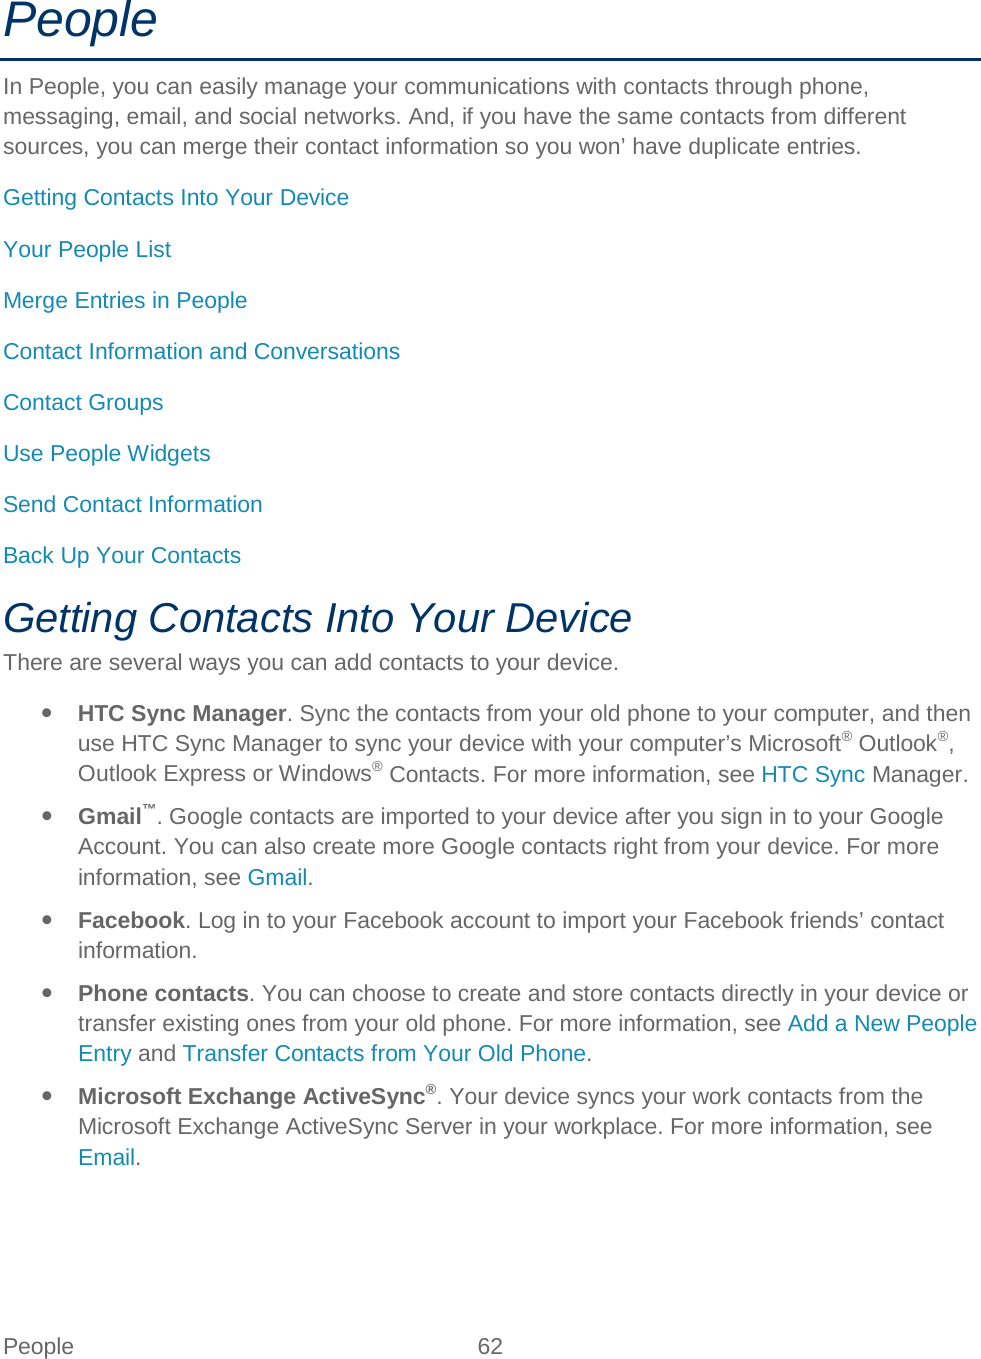  People 62   People In People, you can easily manage your communications with contacts through phone, messaging, email, and social networks. And, if you have the same contacts from different sources, you can merge their contact information so you won’ have duplicate entries. Getting Contacts Into Your Device Your People List Merge Entries in People Contact Information and Conversations Contact Groups Use People Widgets Send Contact Information Back Up Your Contacts Getting Contacts Into Your Device There are several ways you can add contacts to your device.  HTC Sync Manager. Sync the contacts from your old phone to your computer, and then use HTC Sync Manager to sync your device with your computer’s Microsoft® Outlook®, Outlook Express or Windows® Contacts. For more information, see HTC Sync Manager.  Gmail™. Google contacts are imported to your device after you sign in to your Google Account. You can also create more Google contacts right from your device. For more information, see Gmail.  Facebook. Log in to your Facebook account to import your Facebook friends’ contact information.  Phone contacts. You can choose to create and store contacts directly in your device or transfer existing ones from your old phone. For more information, see Add a New People Entry and Transfer Contacts from Your Old Phone.   Microsoft Exchange ActiveSync®. Your device syncs your work contacts from the Microsoft Exchange ActiveSync Server in your workplace. For more information, see Email. 